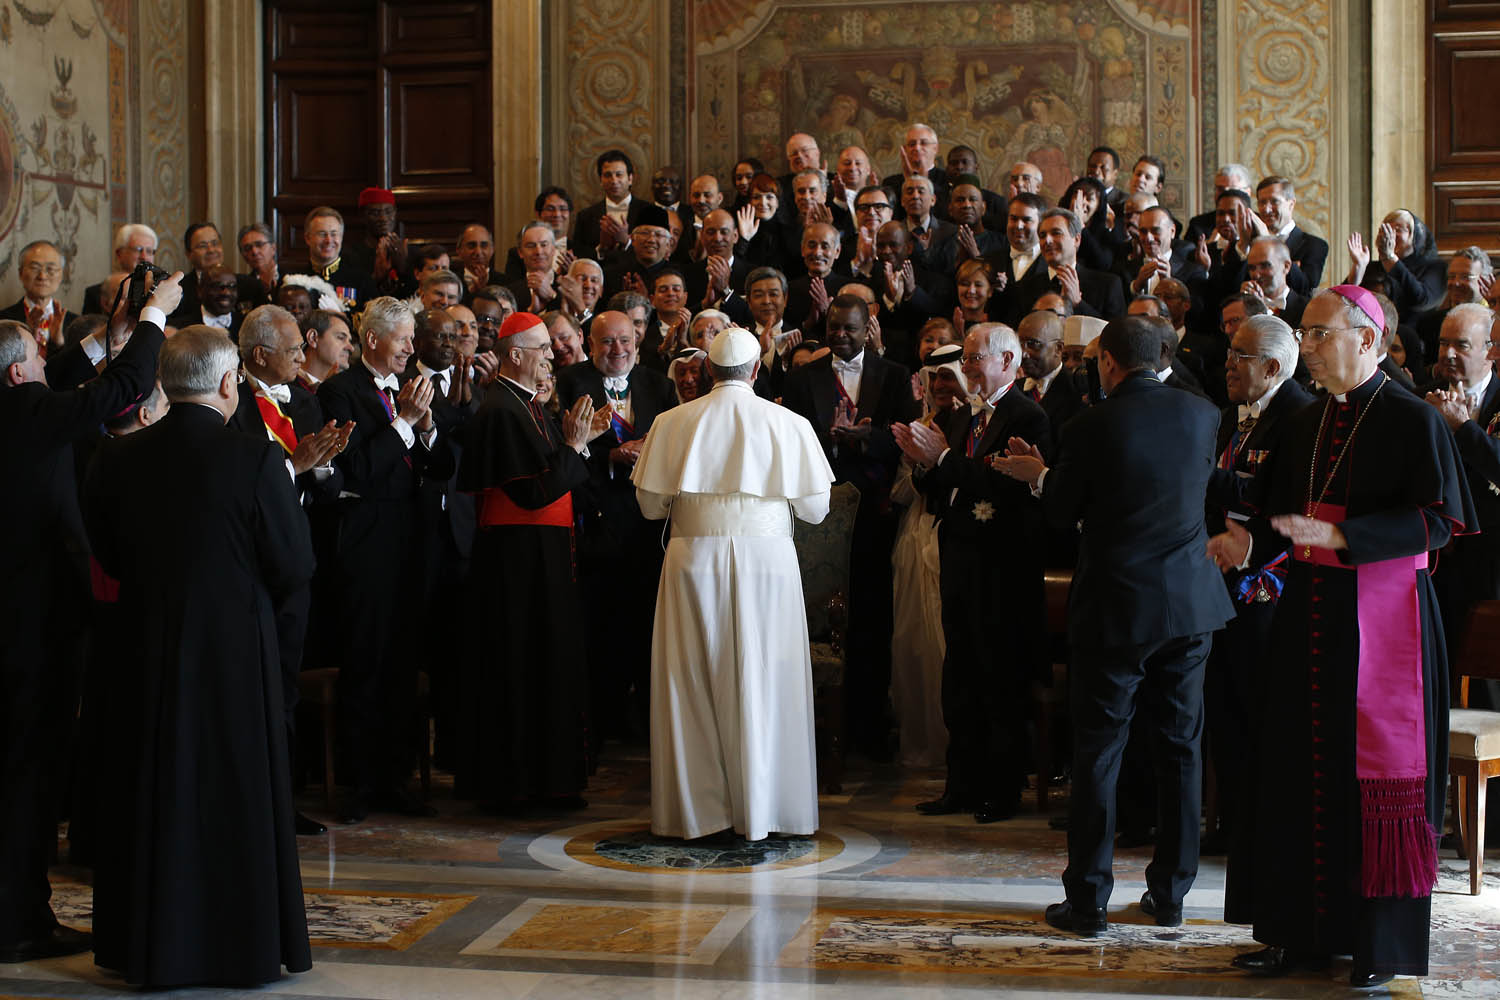 March 22, 2013. Pope Francis greets foreign diplomats during an audience with the diplomatic corps at the Vatican. Pope Francis called for the Roman Catholic Church to  intensify  its dialogue with Islam, echoing hopes in the Muslim world for better ties with the Vatican during his reign.